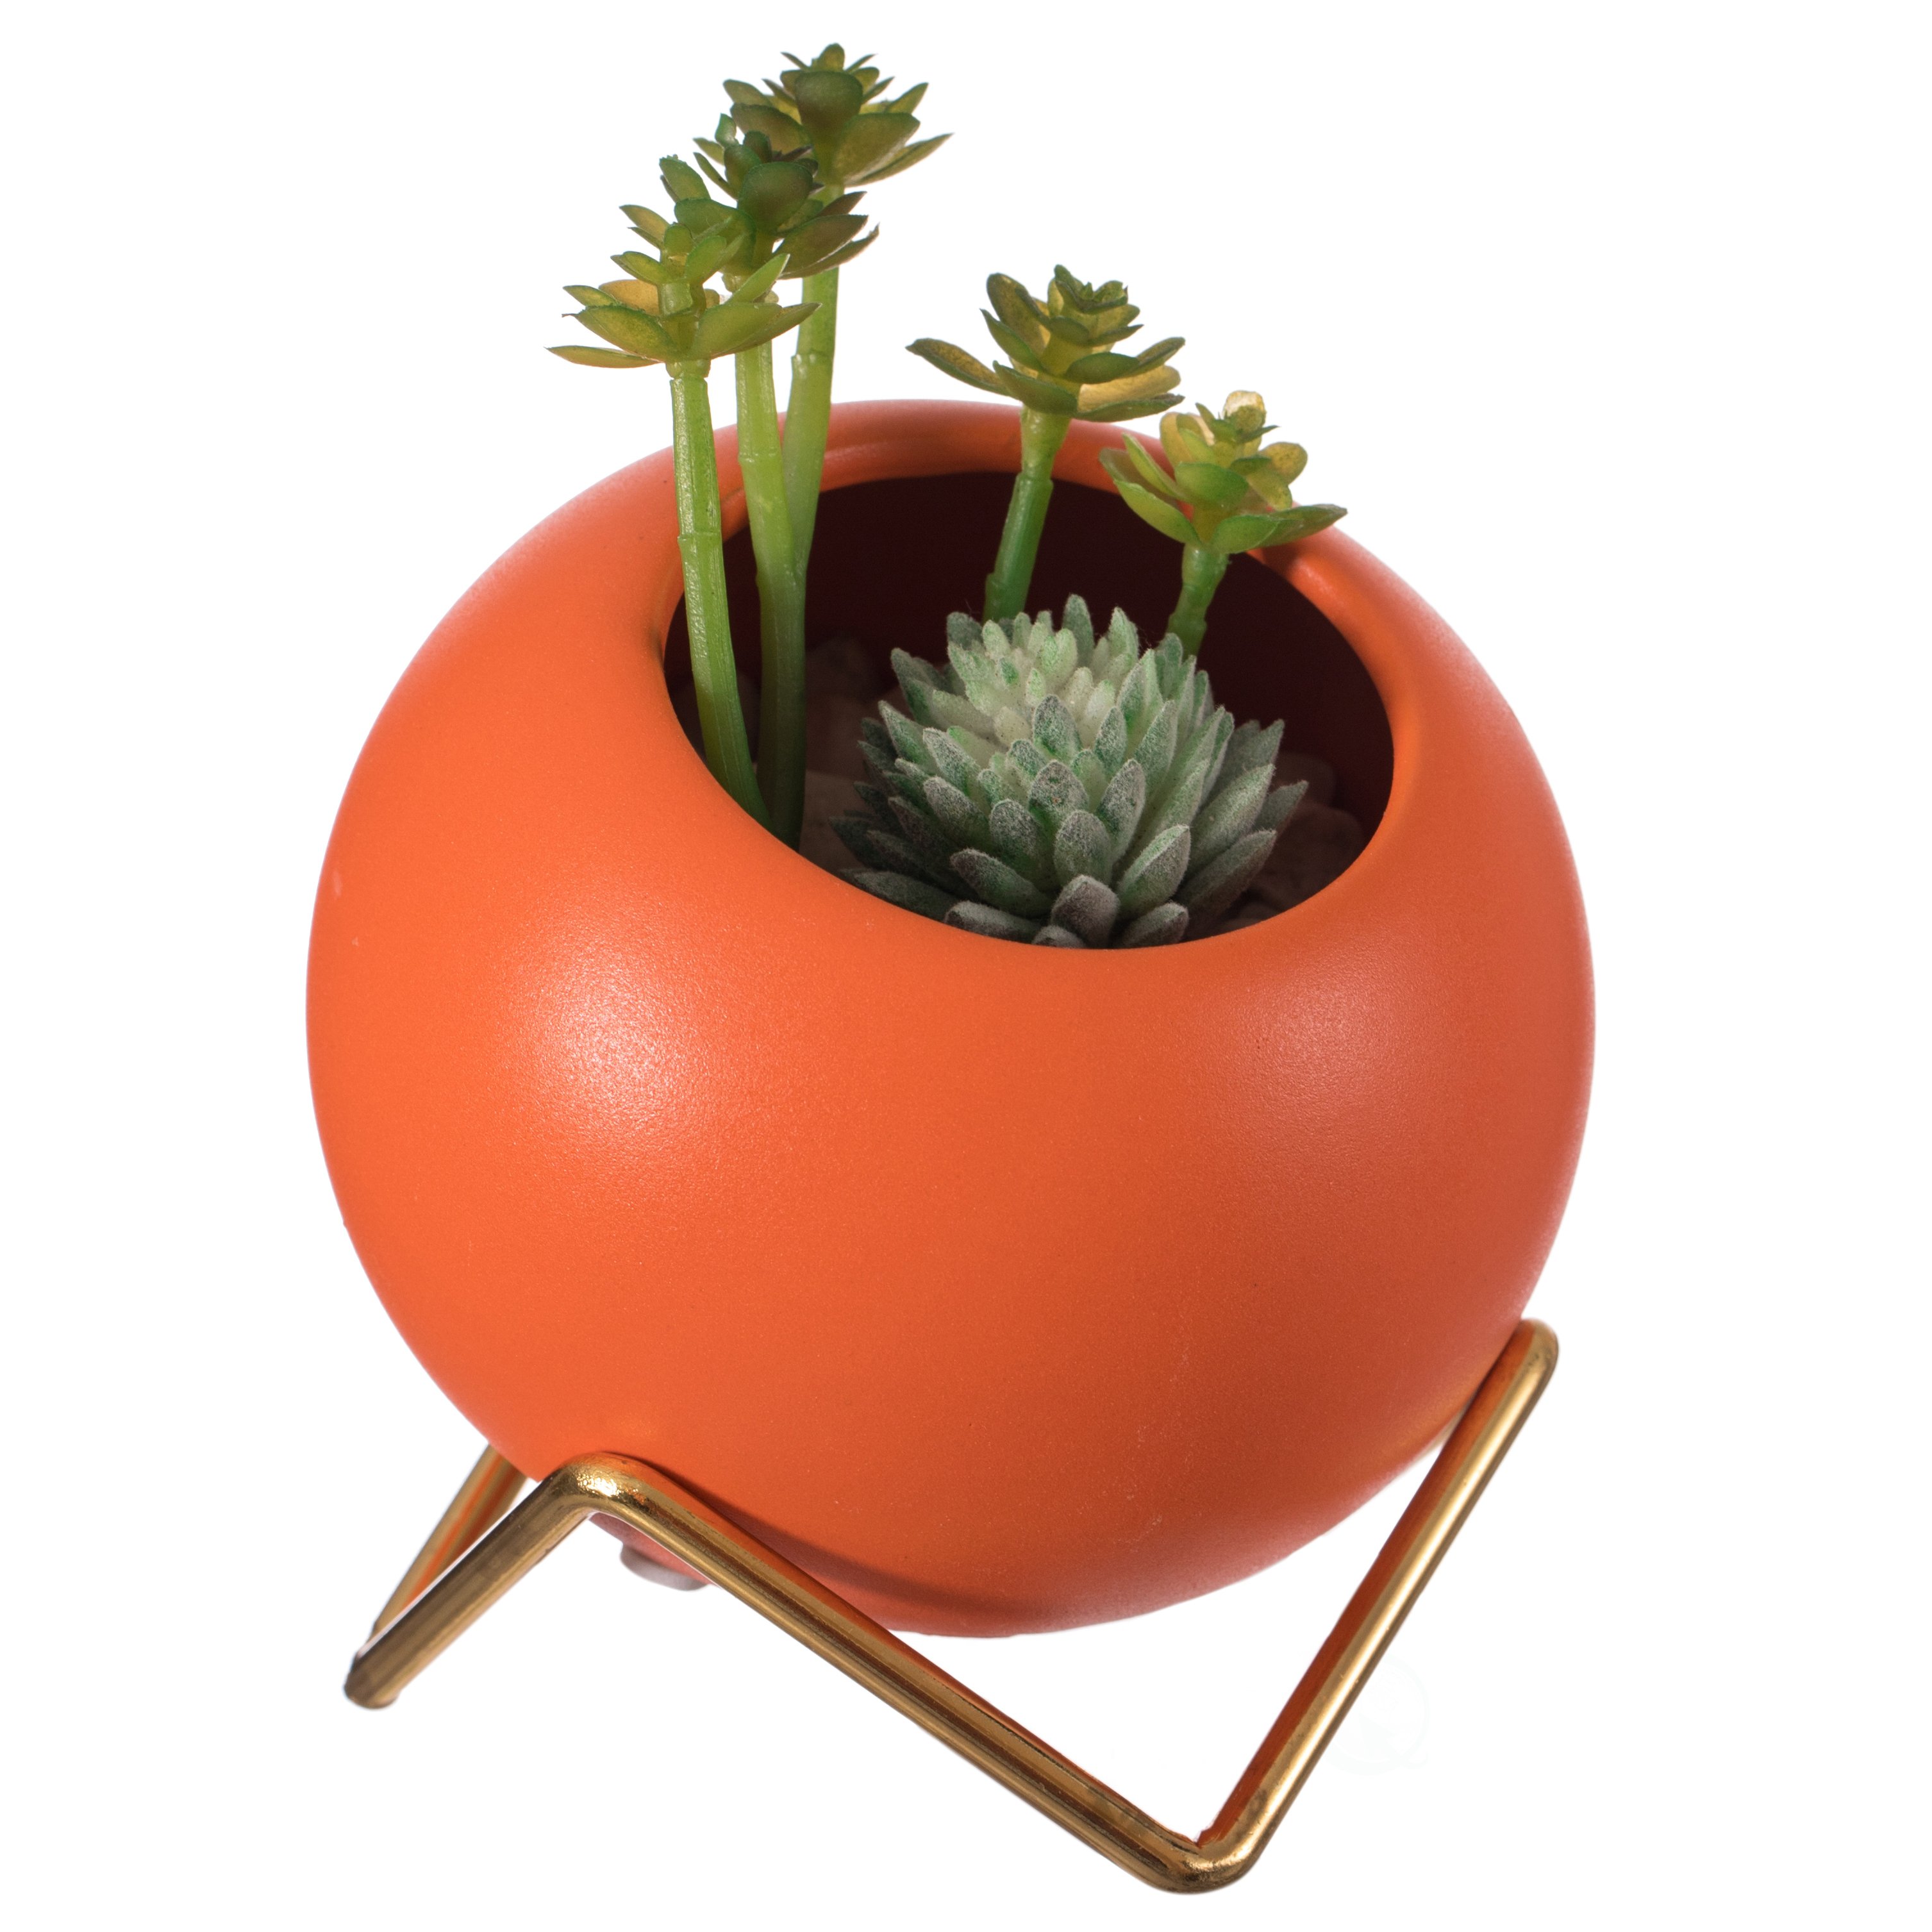 Small Modern Ceramic Flower Vase For Living Room, Home Office Table, Dining Room And Entryway - Orange